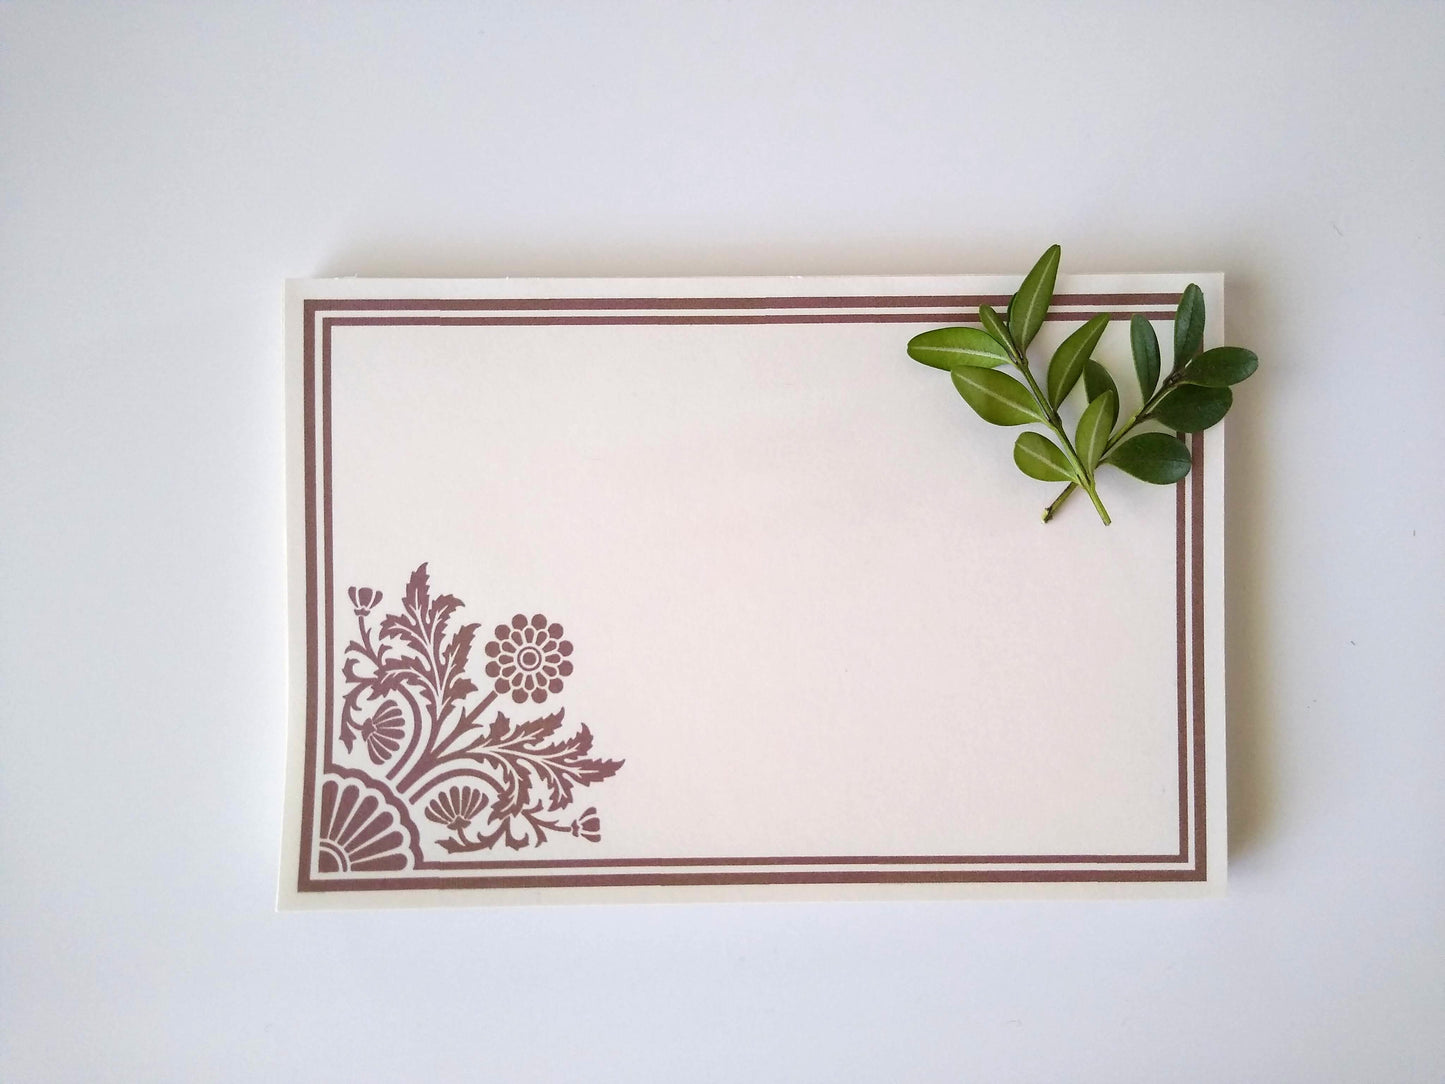 Single notepad with a stylized dahlia design in the lower left corner. There is a double line border around the whole notepad. Two small sprigs of leaves rest on the upper right hand corner.